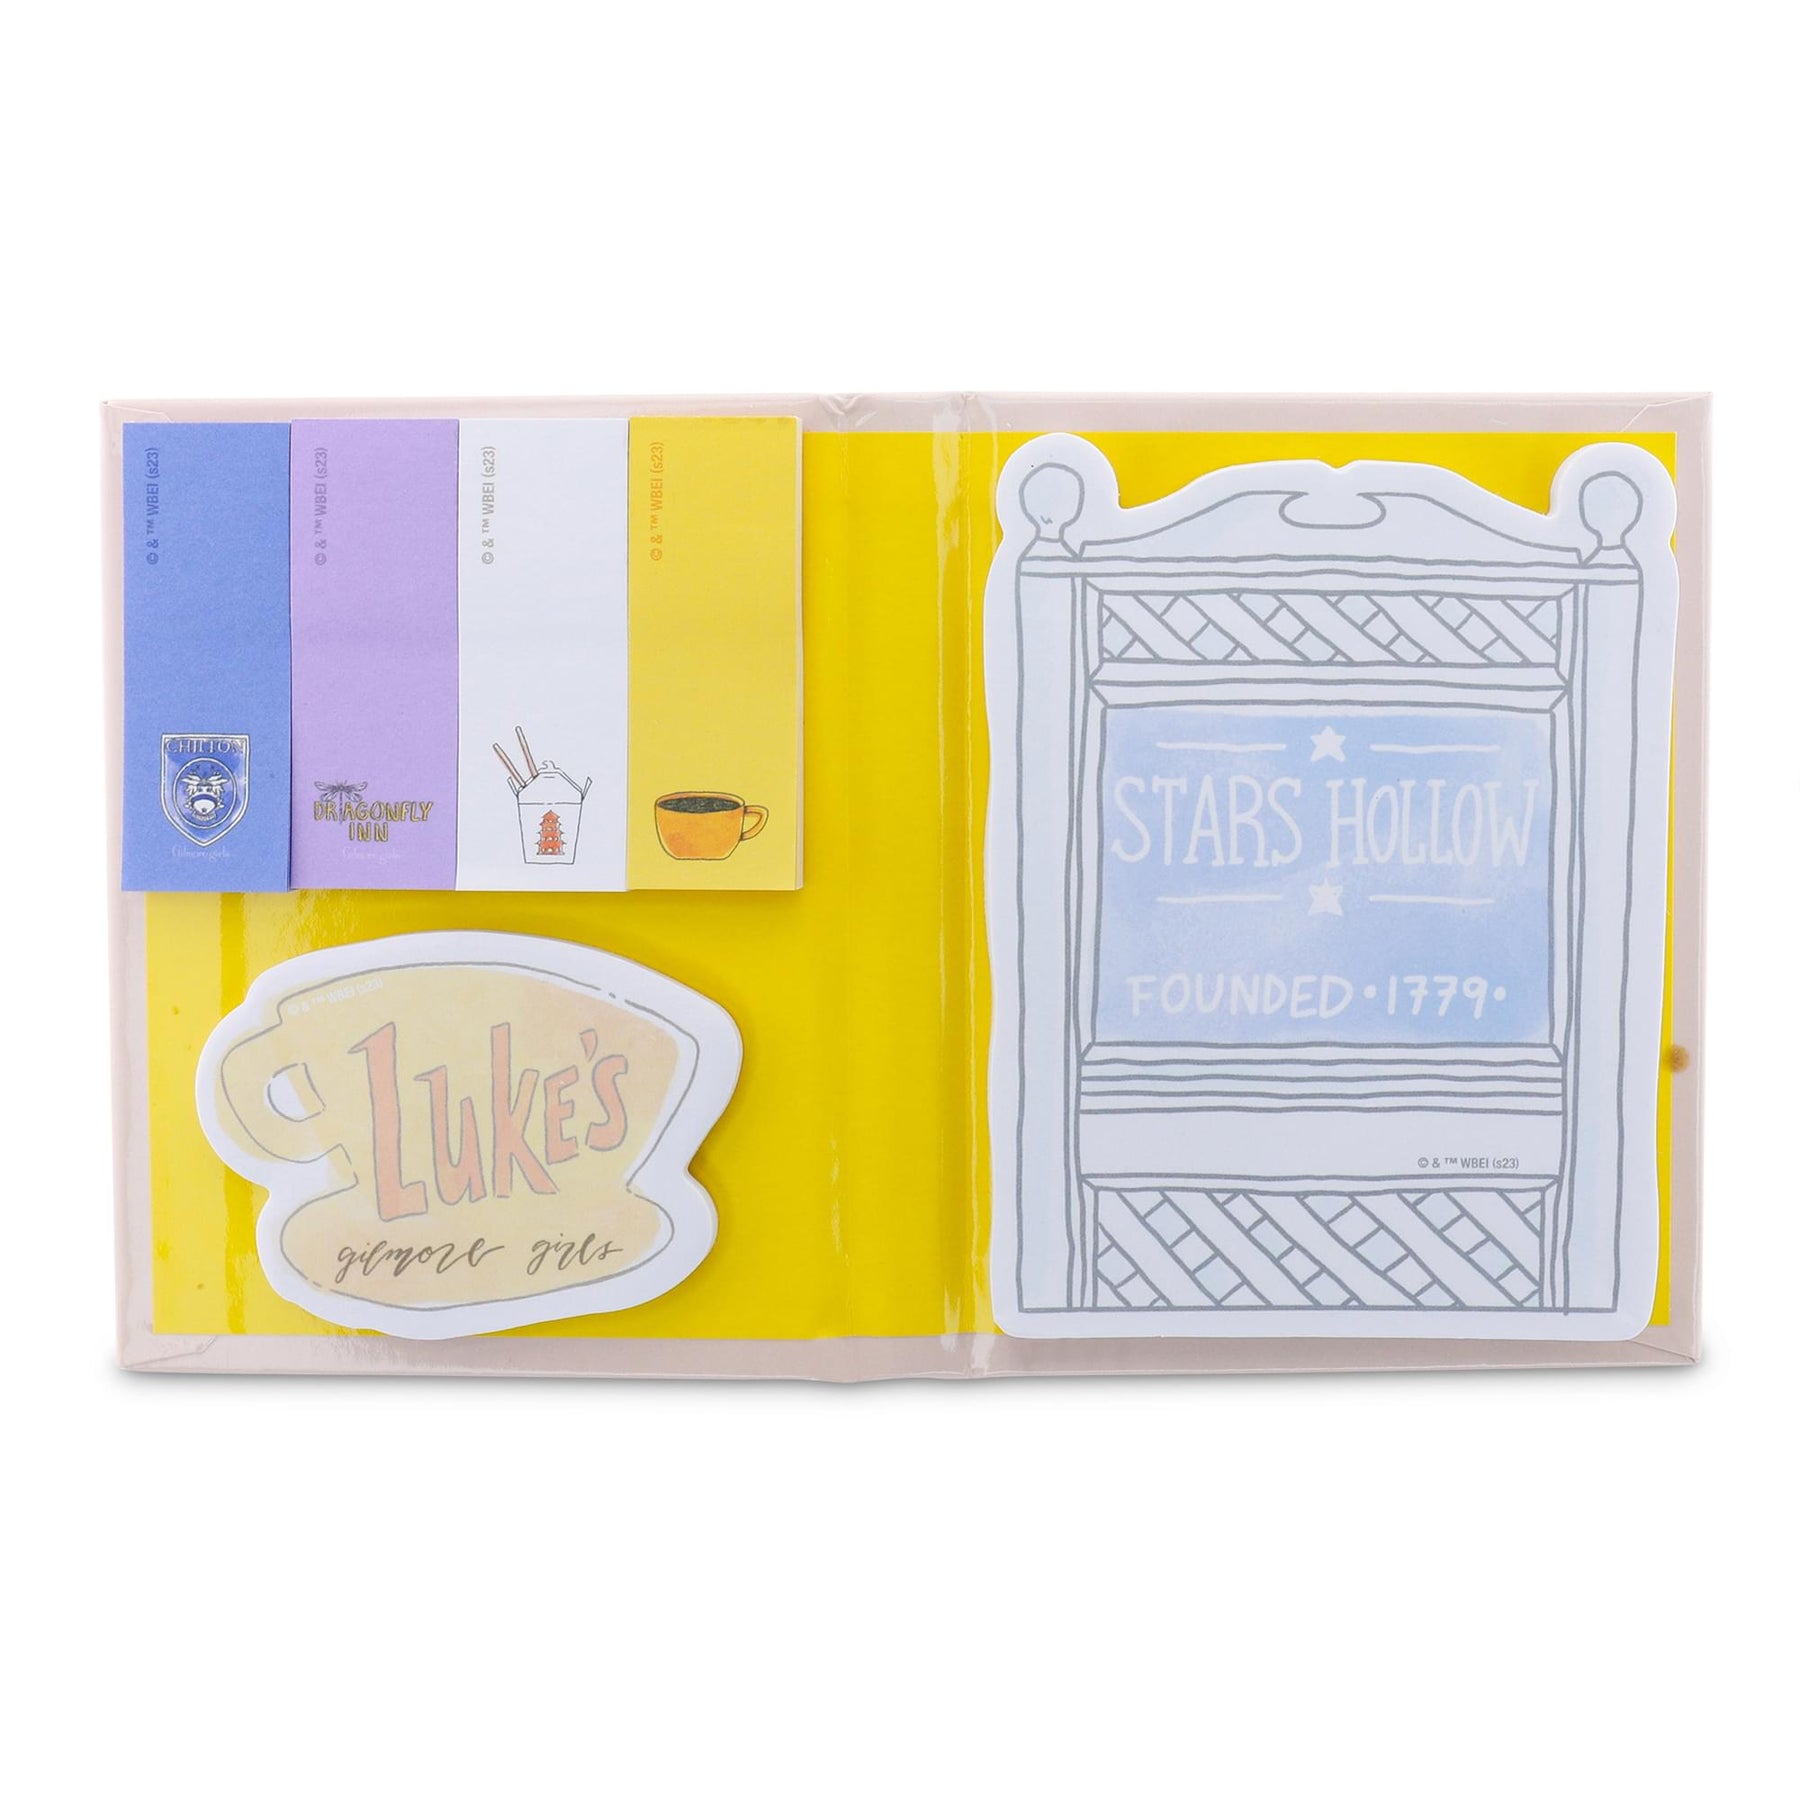 Gilmore Girls "Life's Short, Talk Fast" Sticky Note and Tab Box Set